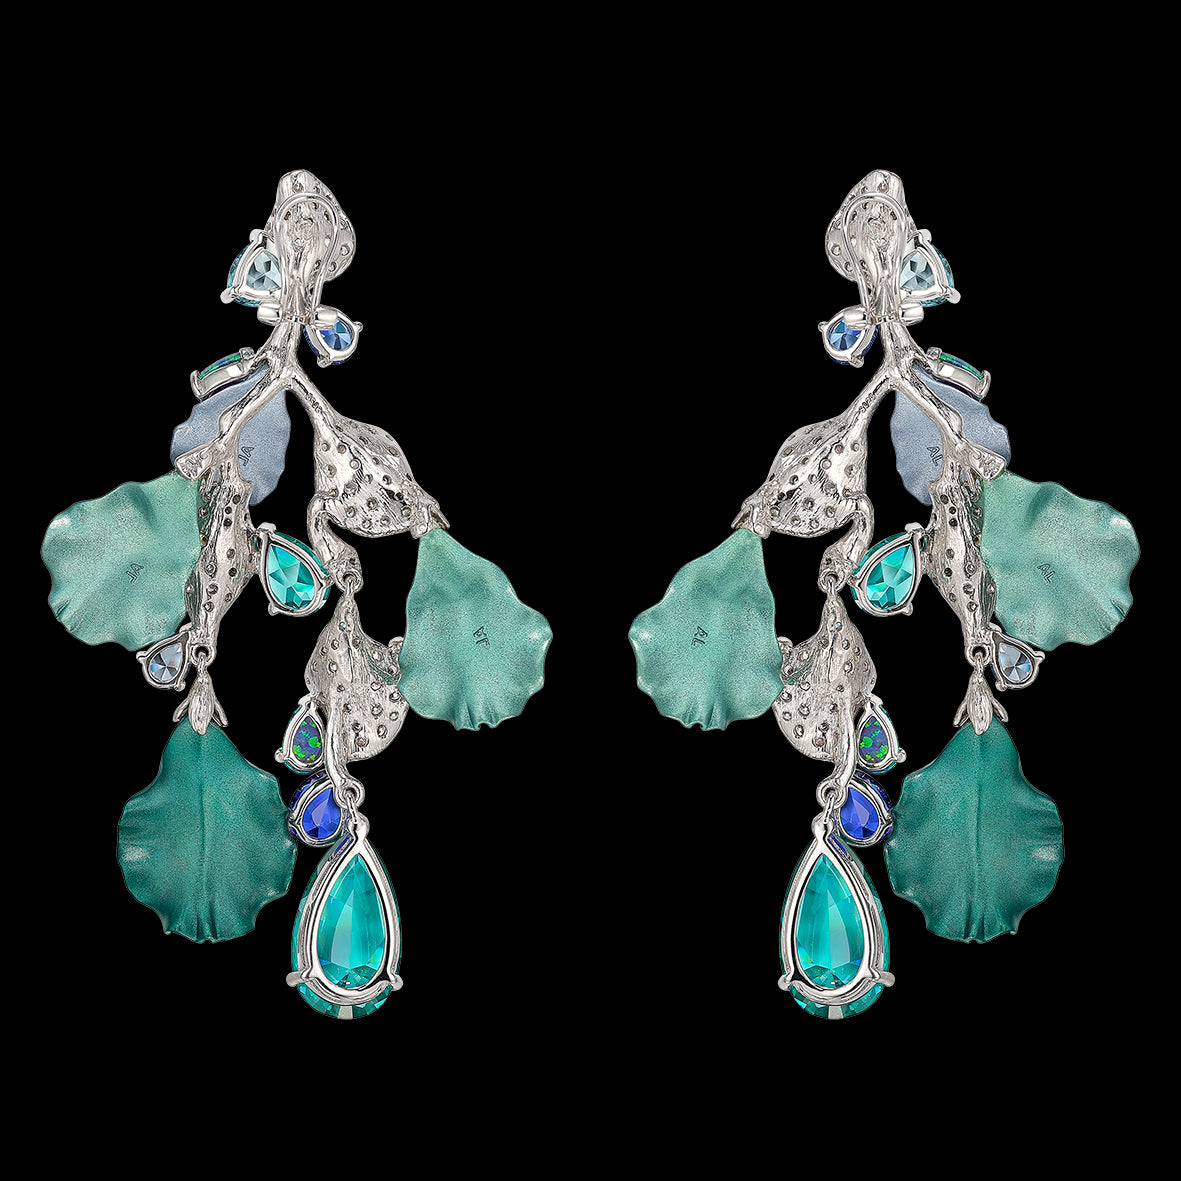 Paraiba Poseidon Earrings, Earring, Anabela Chan Joaillerie - Fine jewelry with laboratory grown and created gemstones hand-crafted in the United Kingdom. Anabela Chan Joaillerie is the first fine jewellery brand in the world to champion laboratory-grown and created gemstones with high jewellery design, artisanal craftsmanship and a focus on ethical and sustainable innovations.